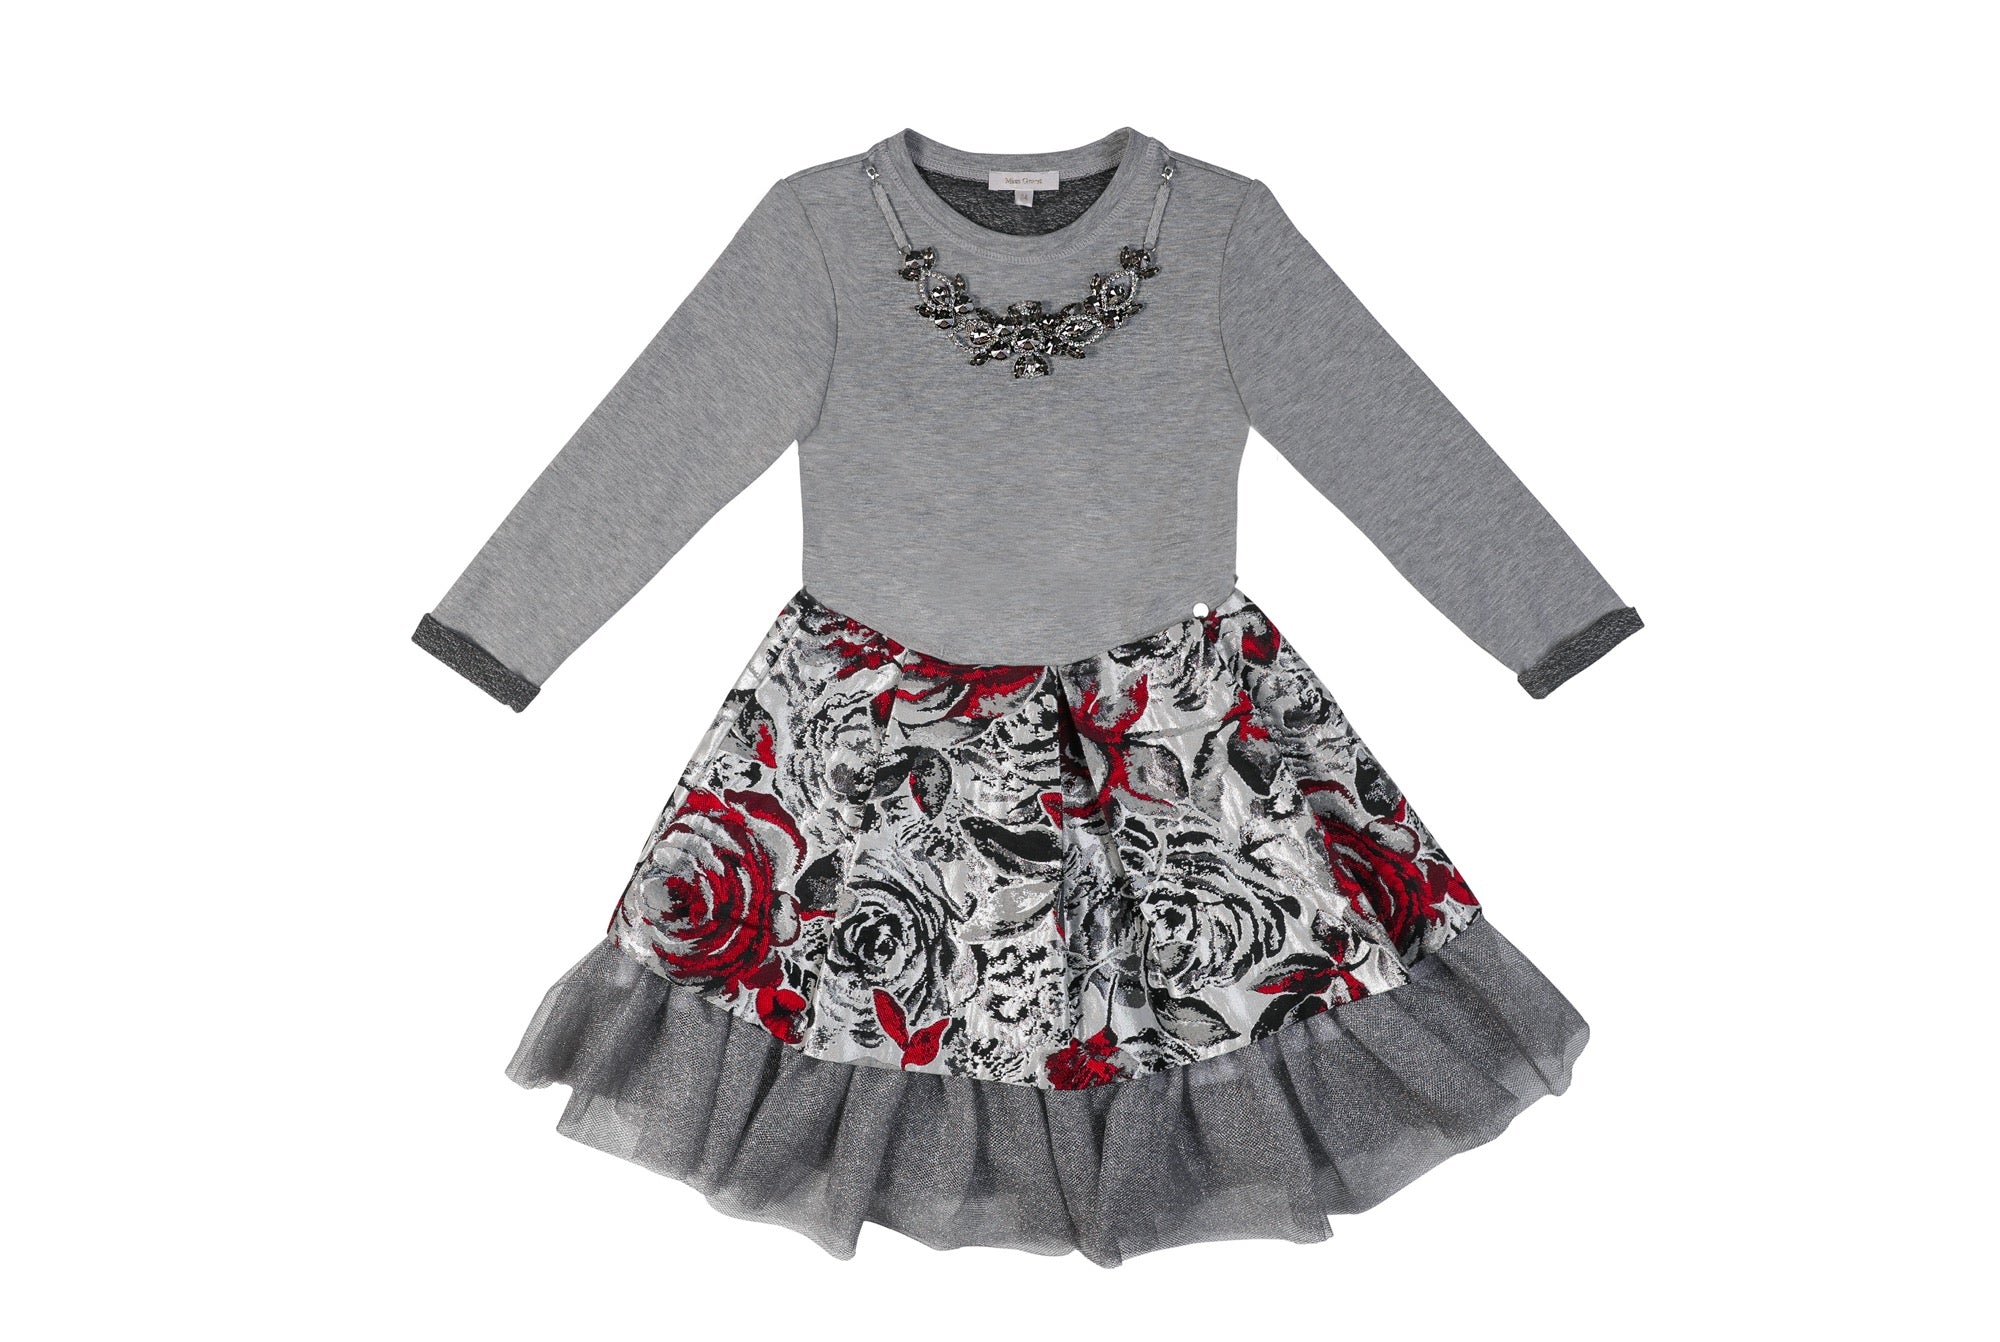 Long sleeves silver dressy dress for girls with floral tulle skirt and a necklace